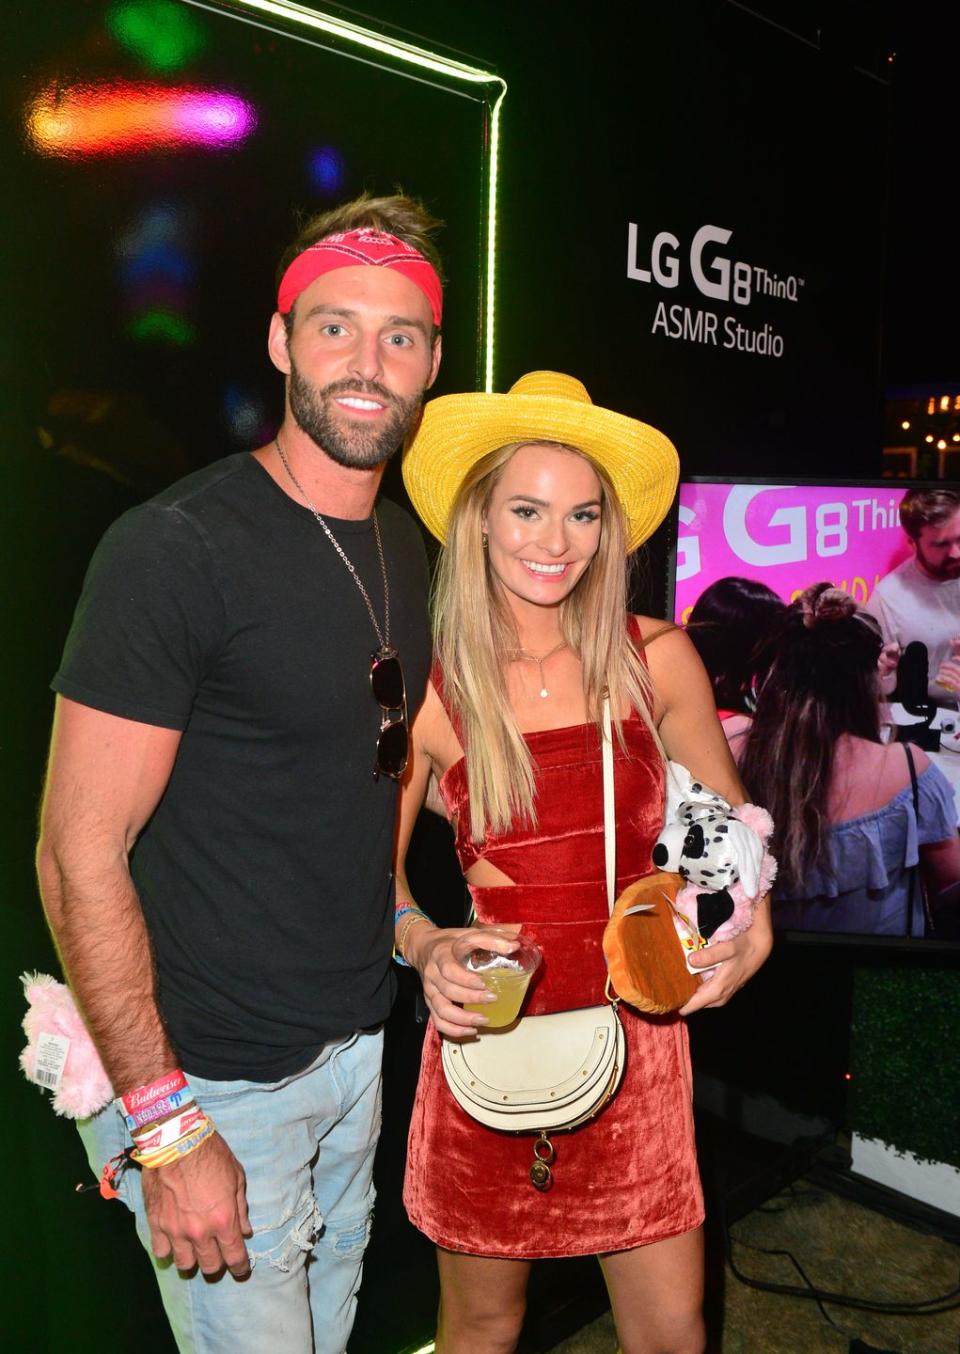 <p>Robby has had a string of relationships with reality stars since breaking things off with Amanda. The social media influencer was briefly connected to <em>Vanderpump Rules </em>star Scheana Shay and then linked to <a href="https://people.com/tv/robby-hayes-juliette-porter-kissing-photo-dating/" rel="nofollow noopener" target="_blank" data-ylk="slk:Siesta Keys star" class="link "><em>Siesta Keys </em>star</a> Juliette Porter (pictured here). For now, though, he seems to be single as a Pringle.</p>